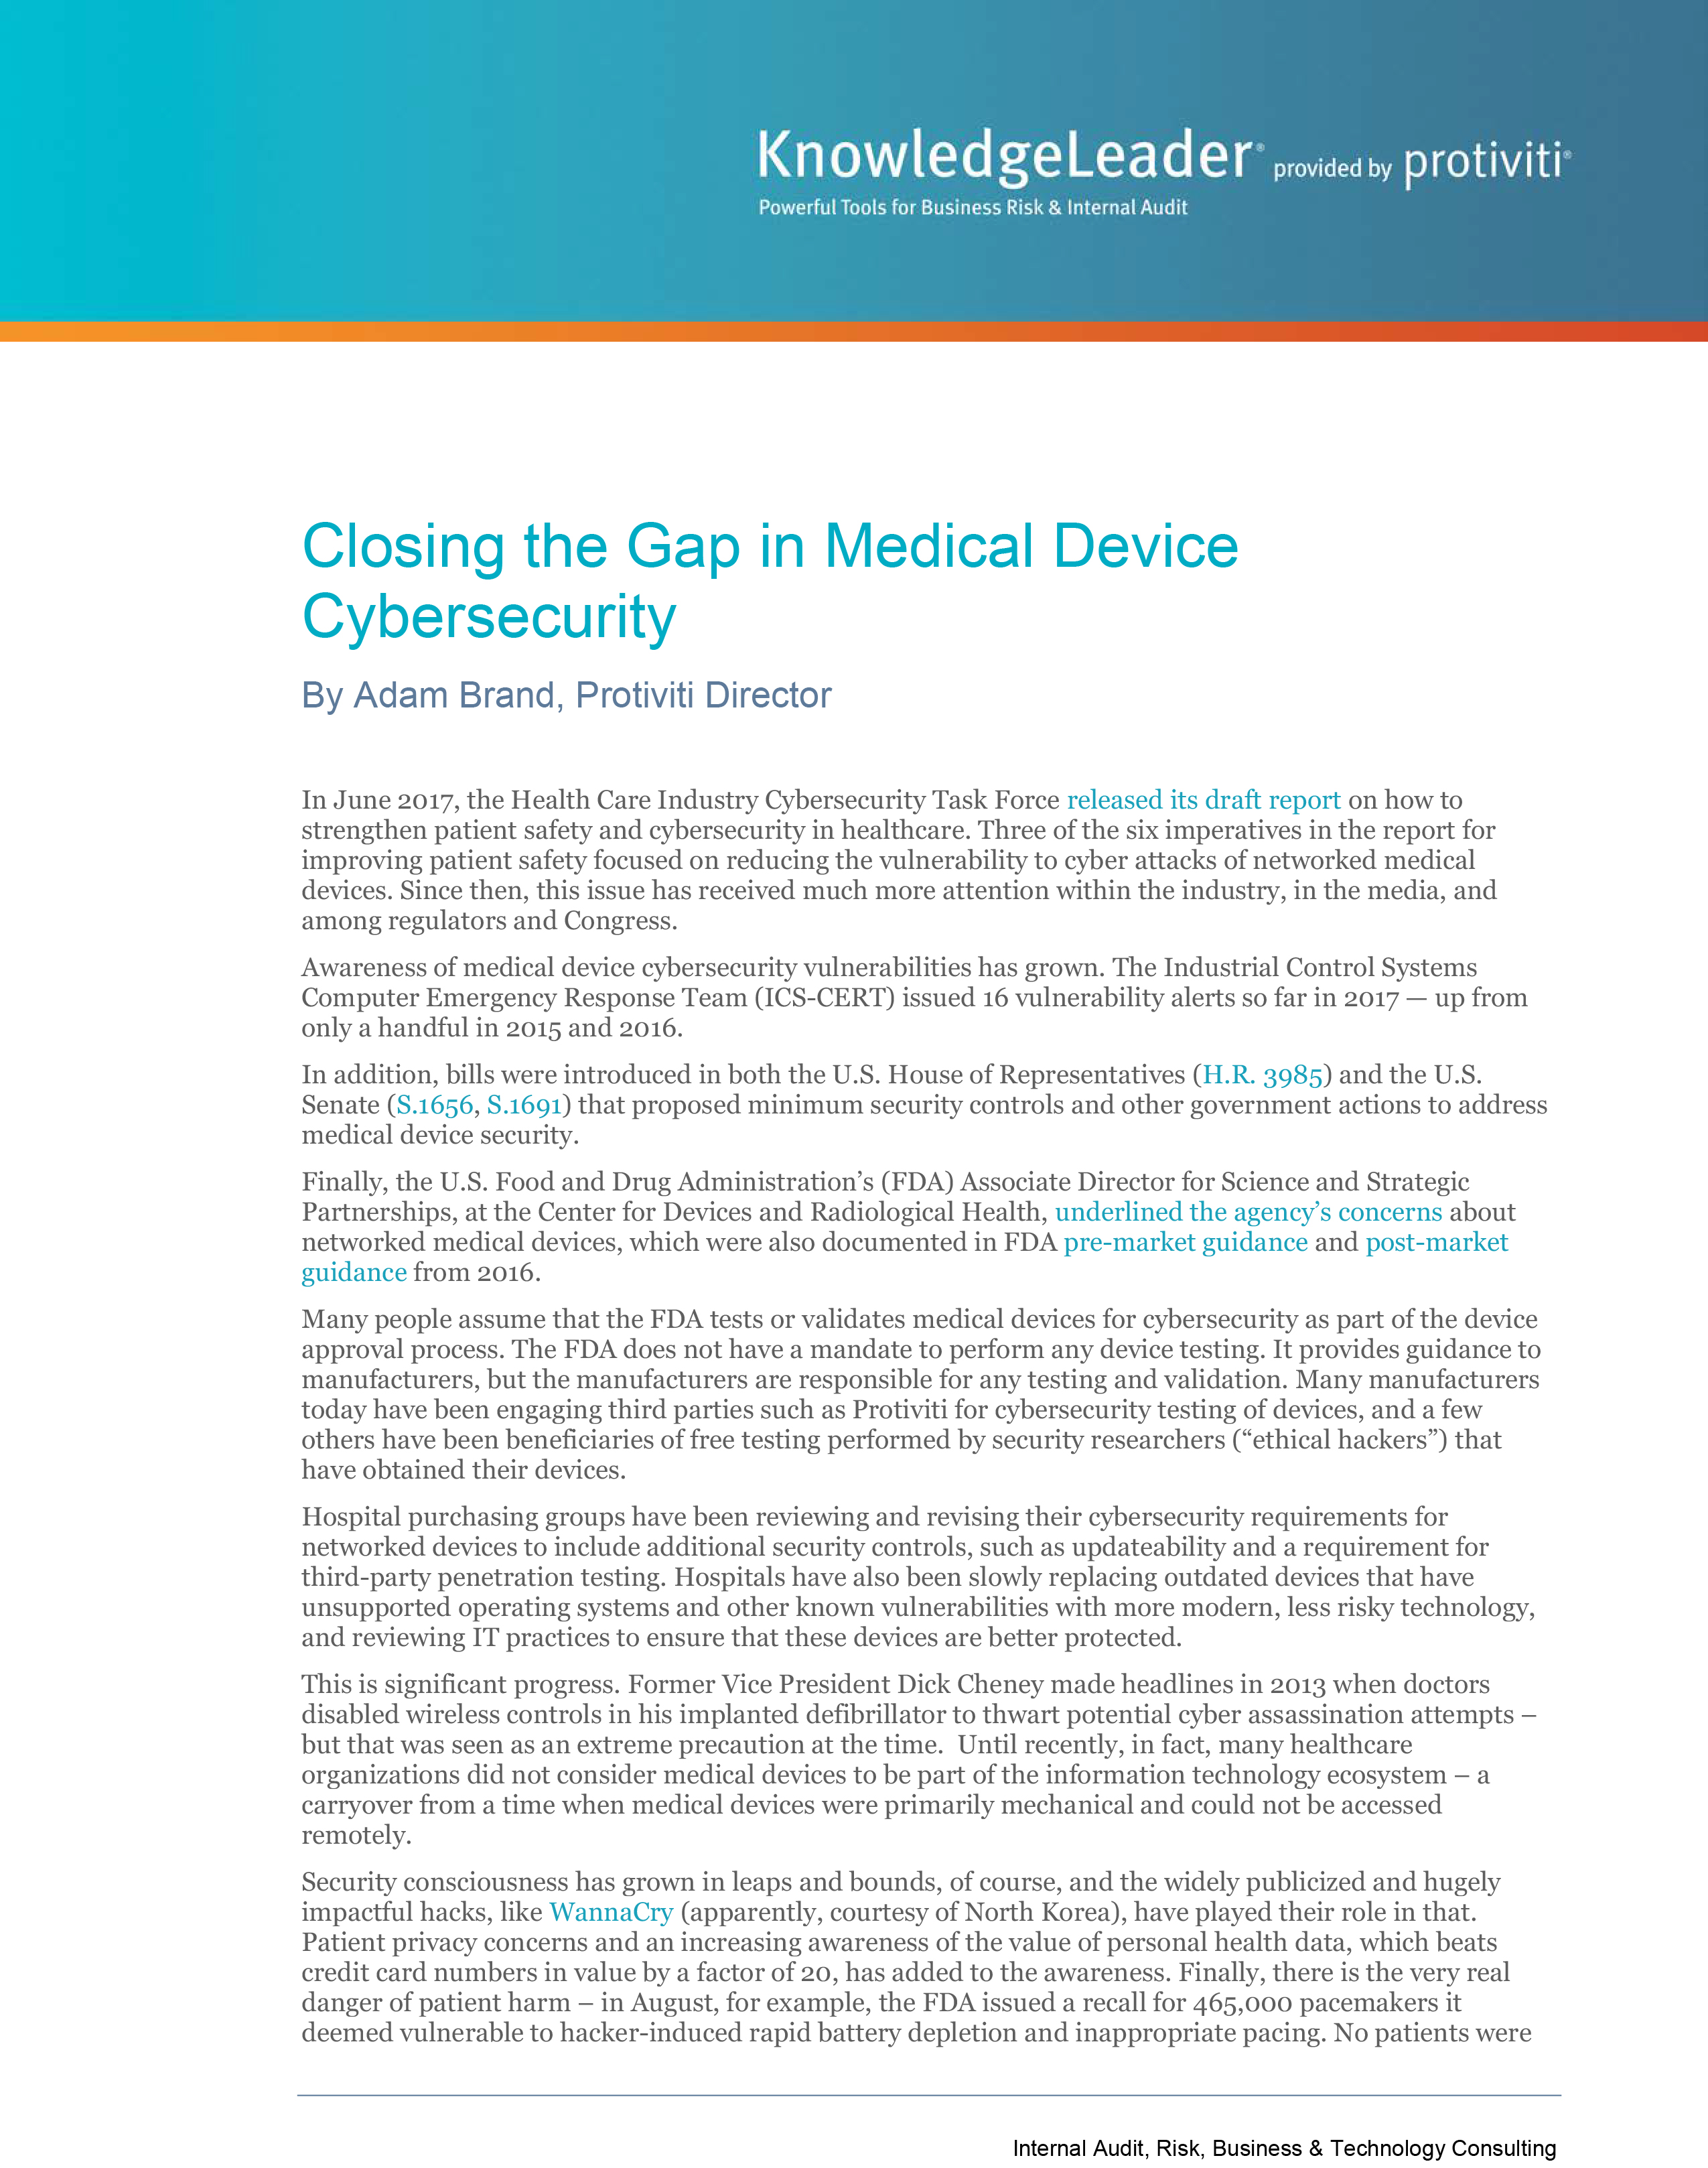 Screenshot of the first page of Closing the Gap in Medical Device Cybersecurity